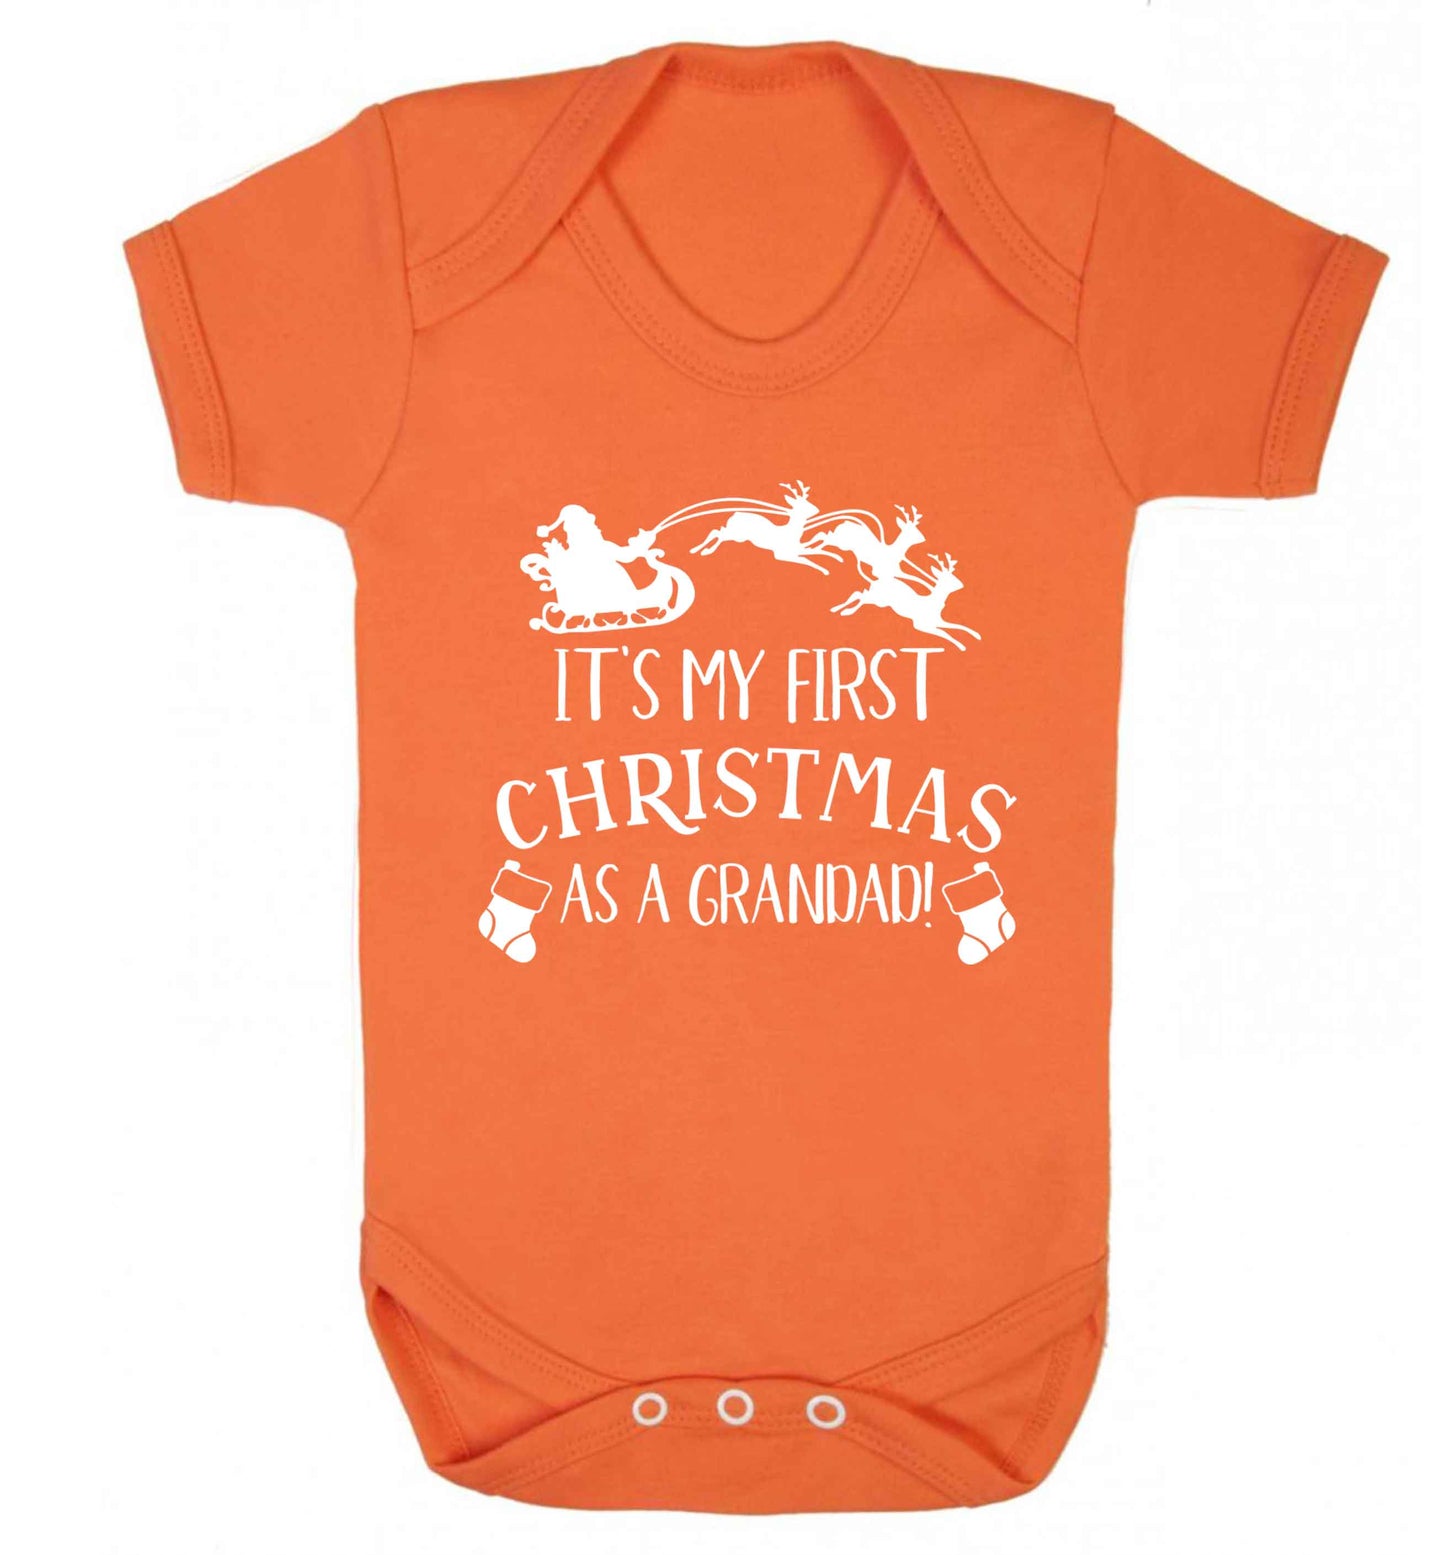 It's my first Christmas as a grandad! Baby Vest orange 18-24 months